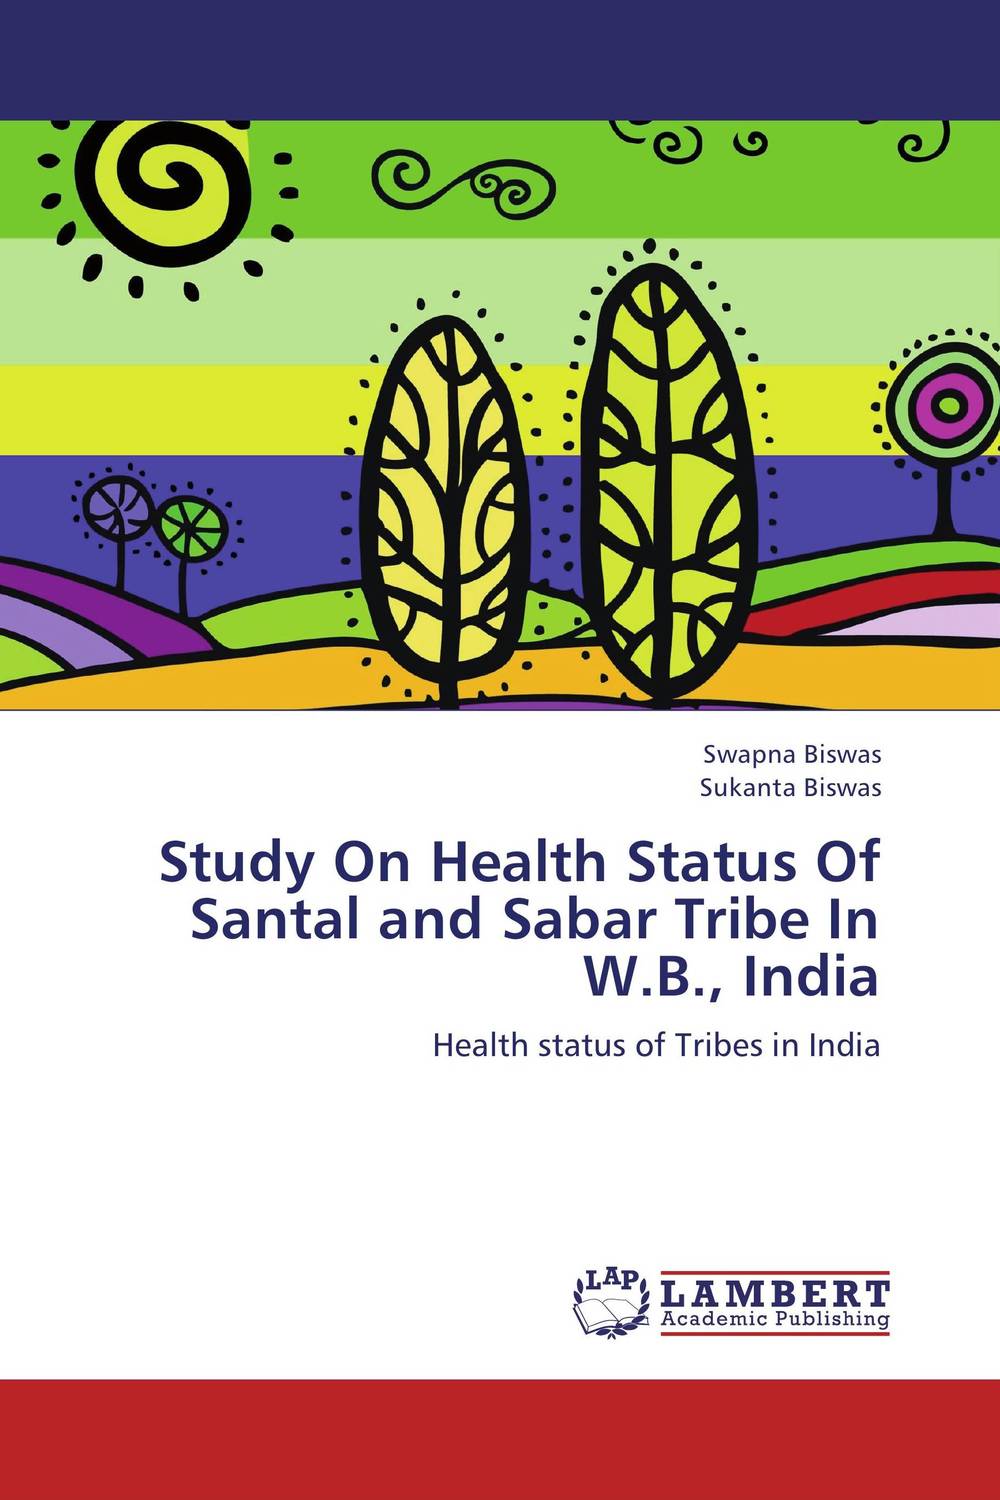 Study On Health Status Of Santal and Sabar Tribe In W.B., India